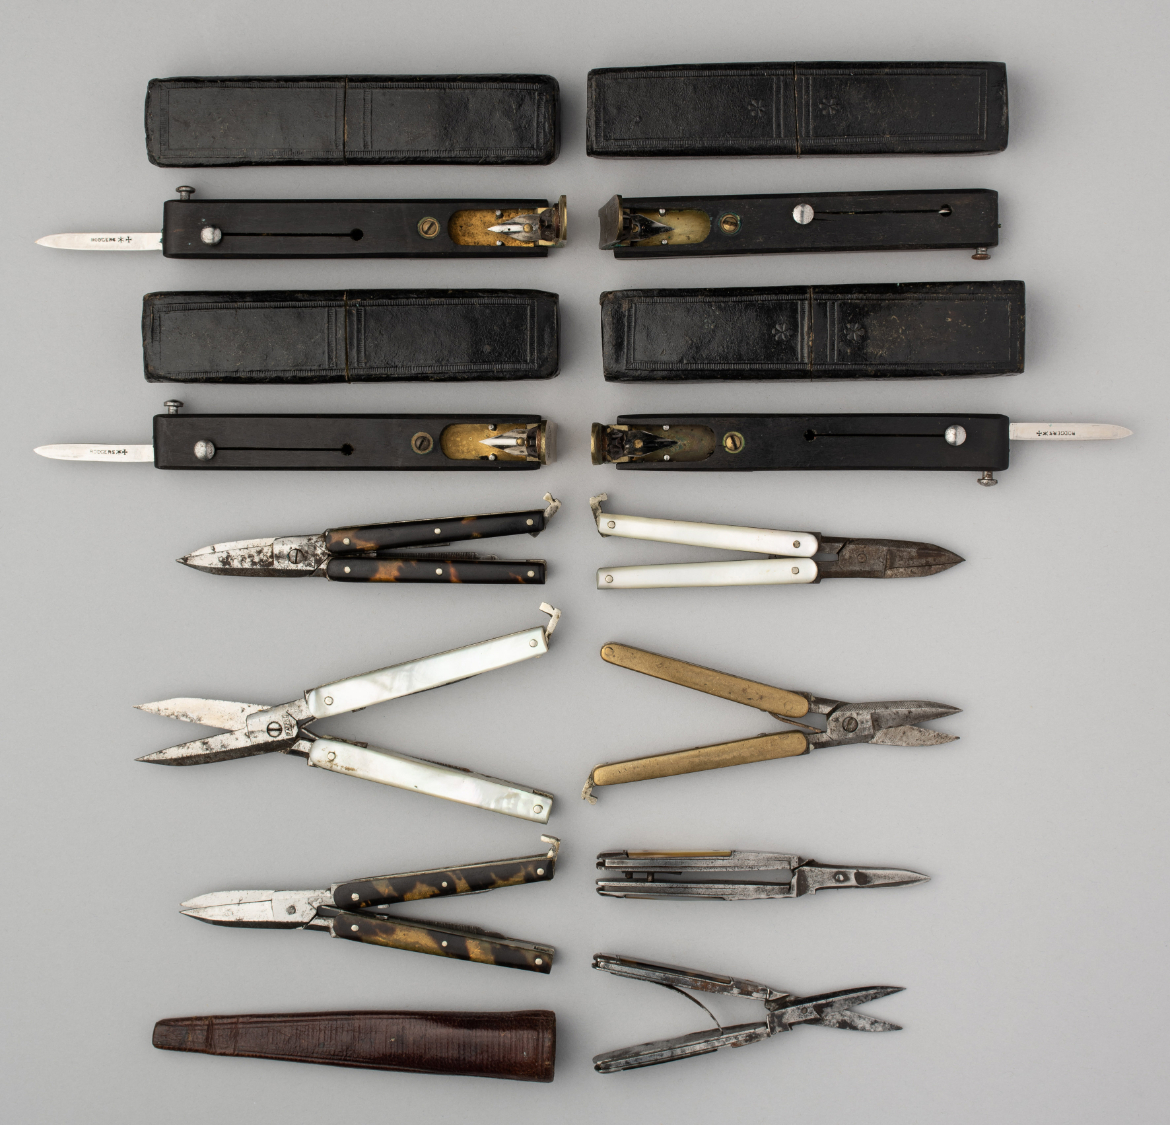 ˜ FOUR JOSEPH RODGERS PATENT QUILL MACHINES AND SEVEN POCKET MANICURE SETS, LATE 19TH/EARLY 20TH